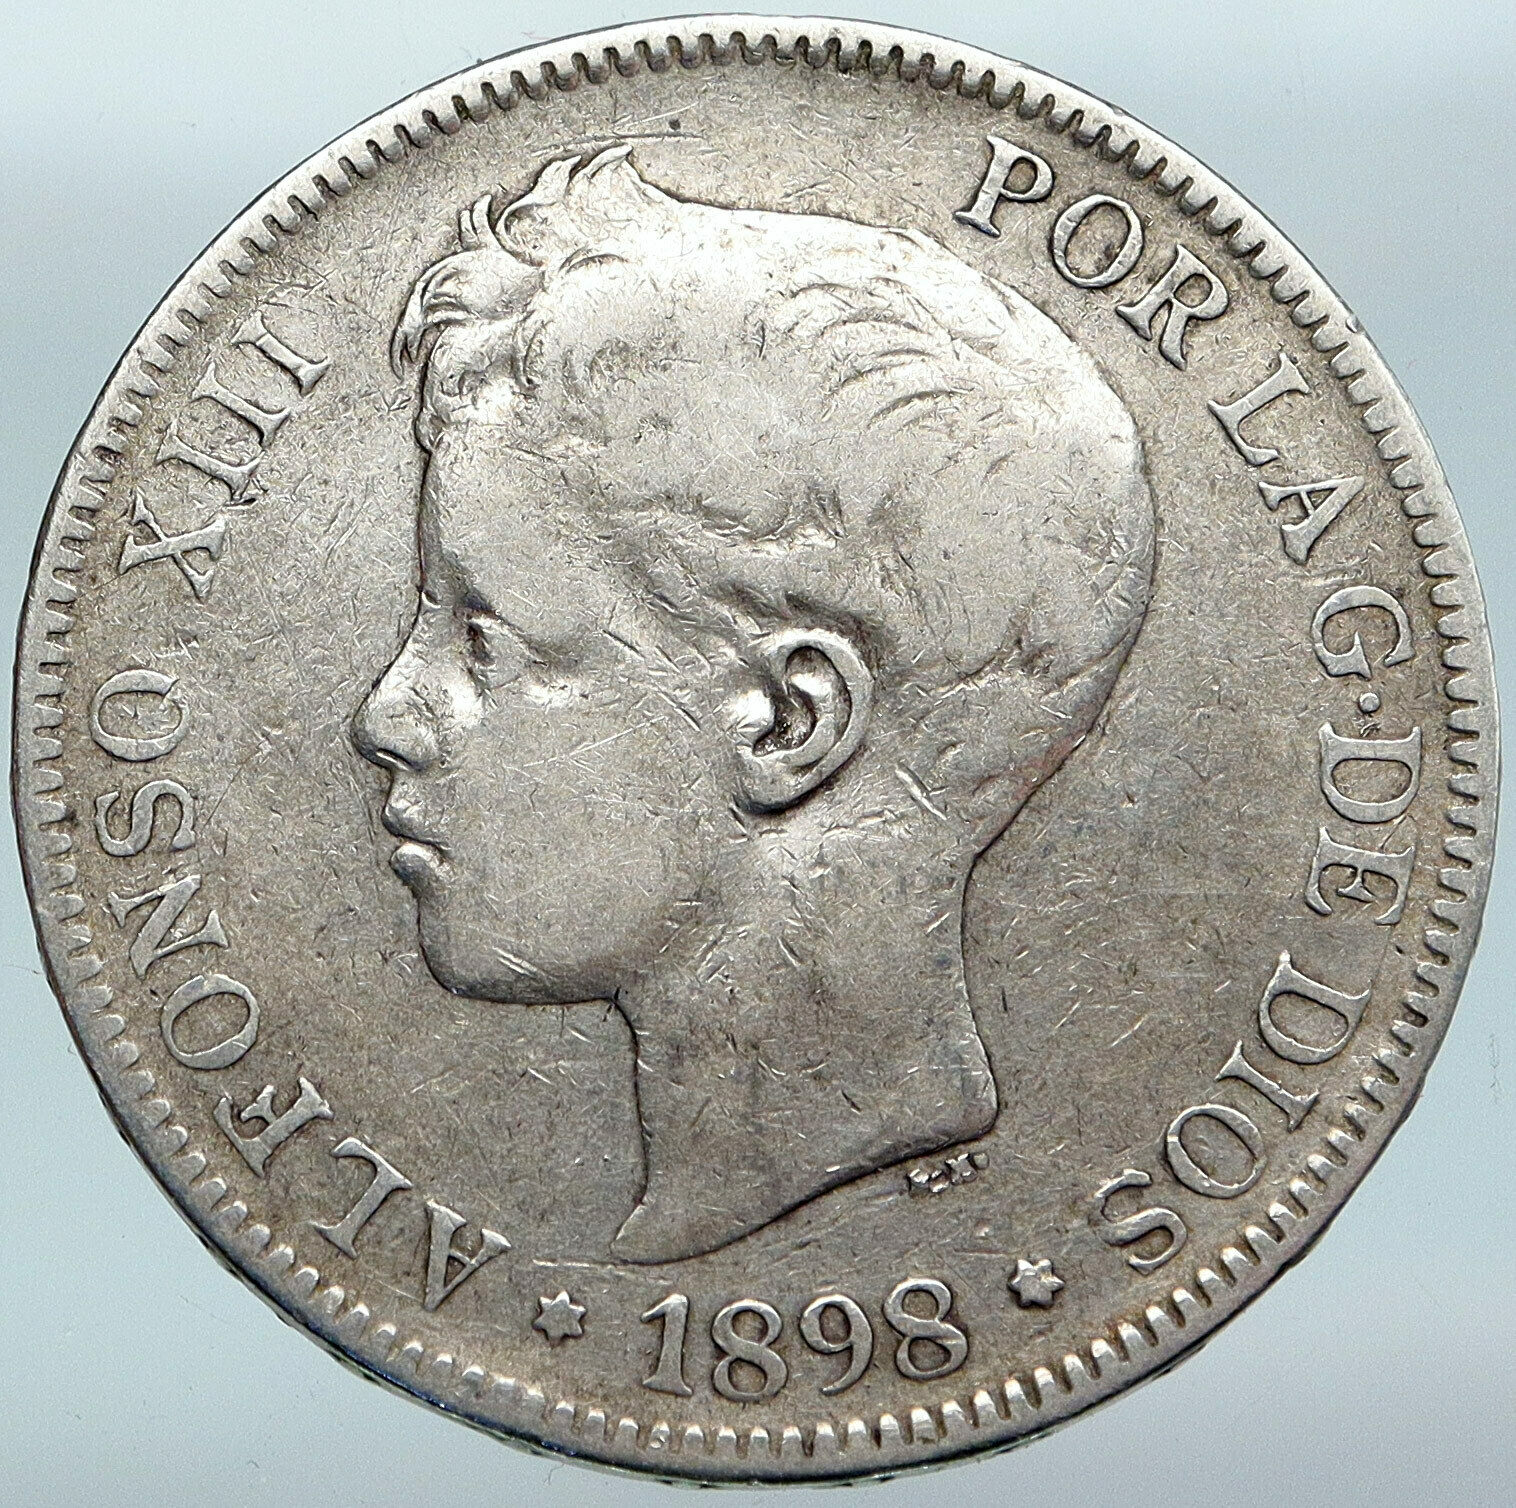 1898 SPAIN Spanish King ALFONSO XIII Old Antique Silver 5 Pesetas Coin i88102